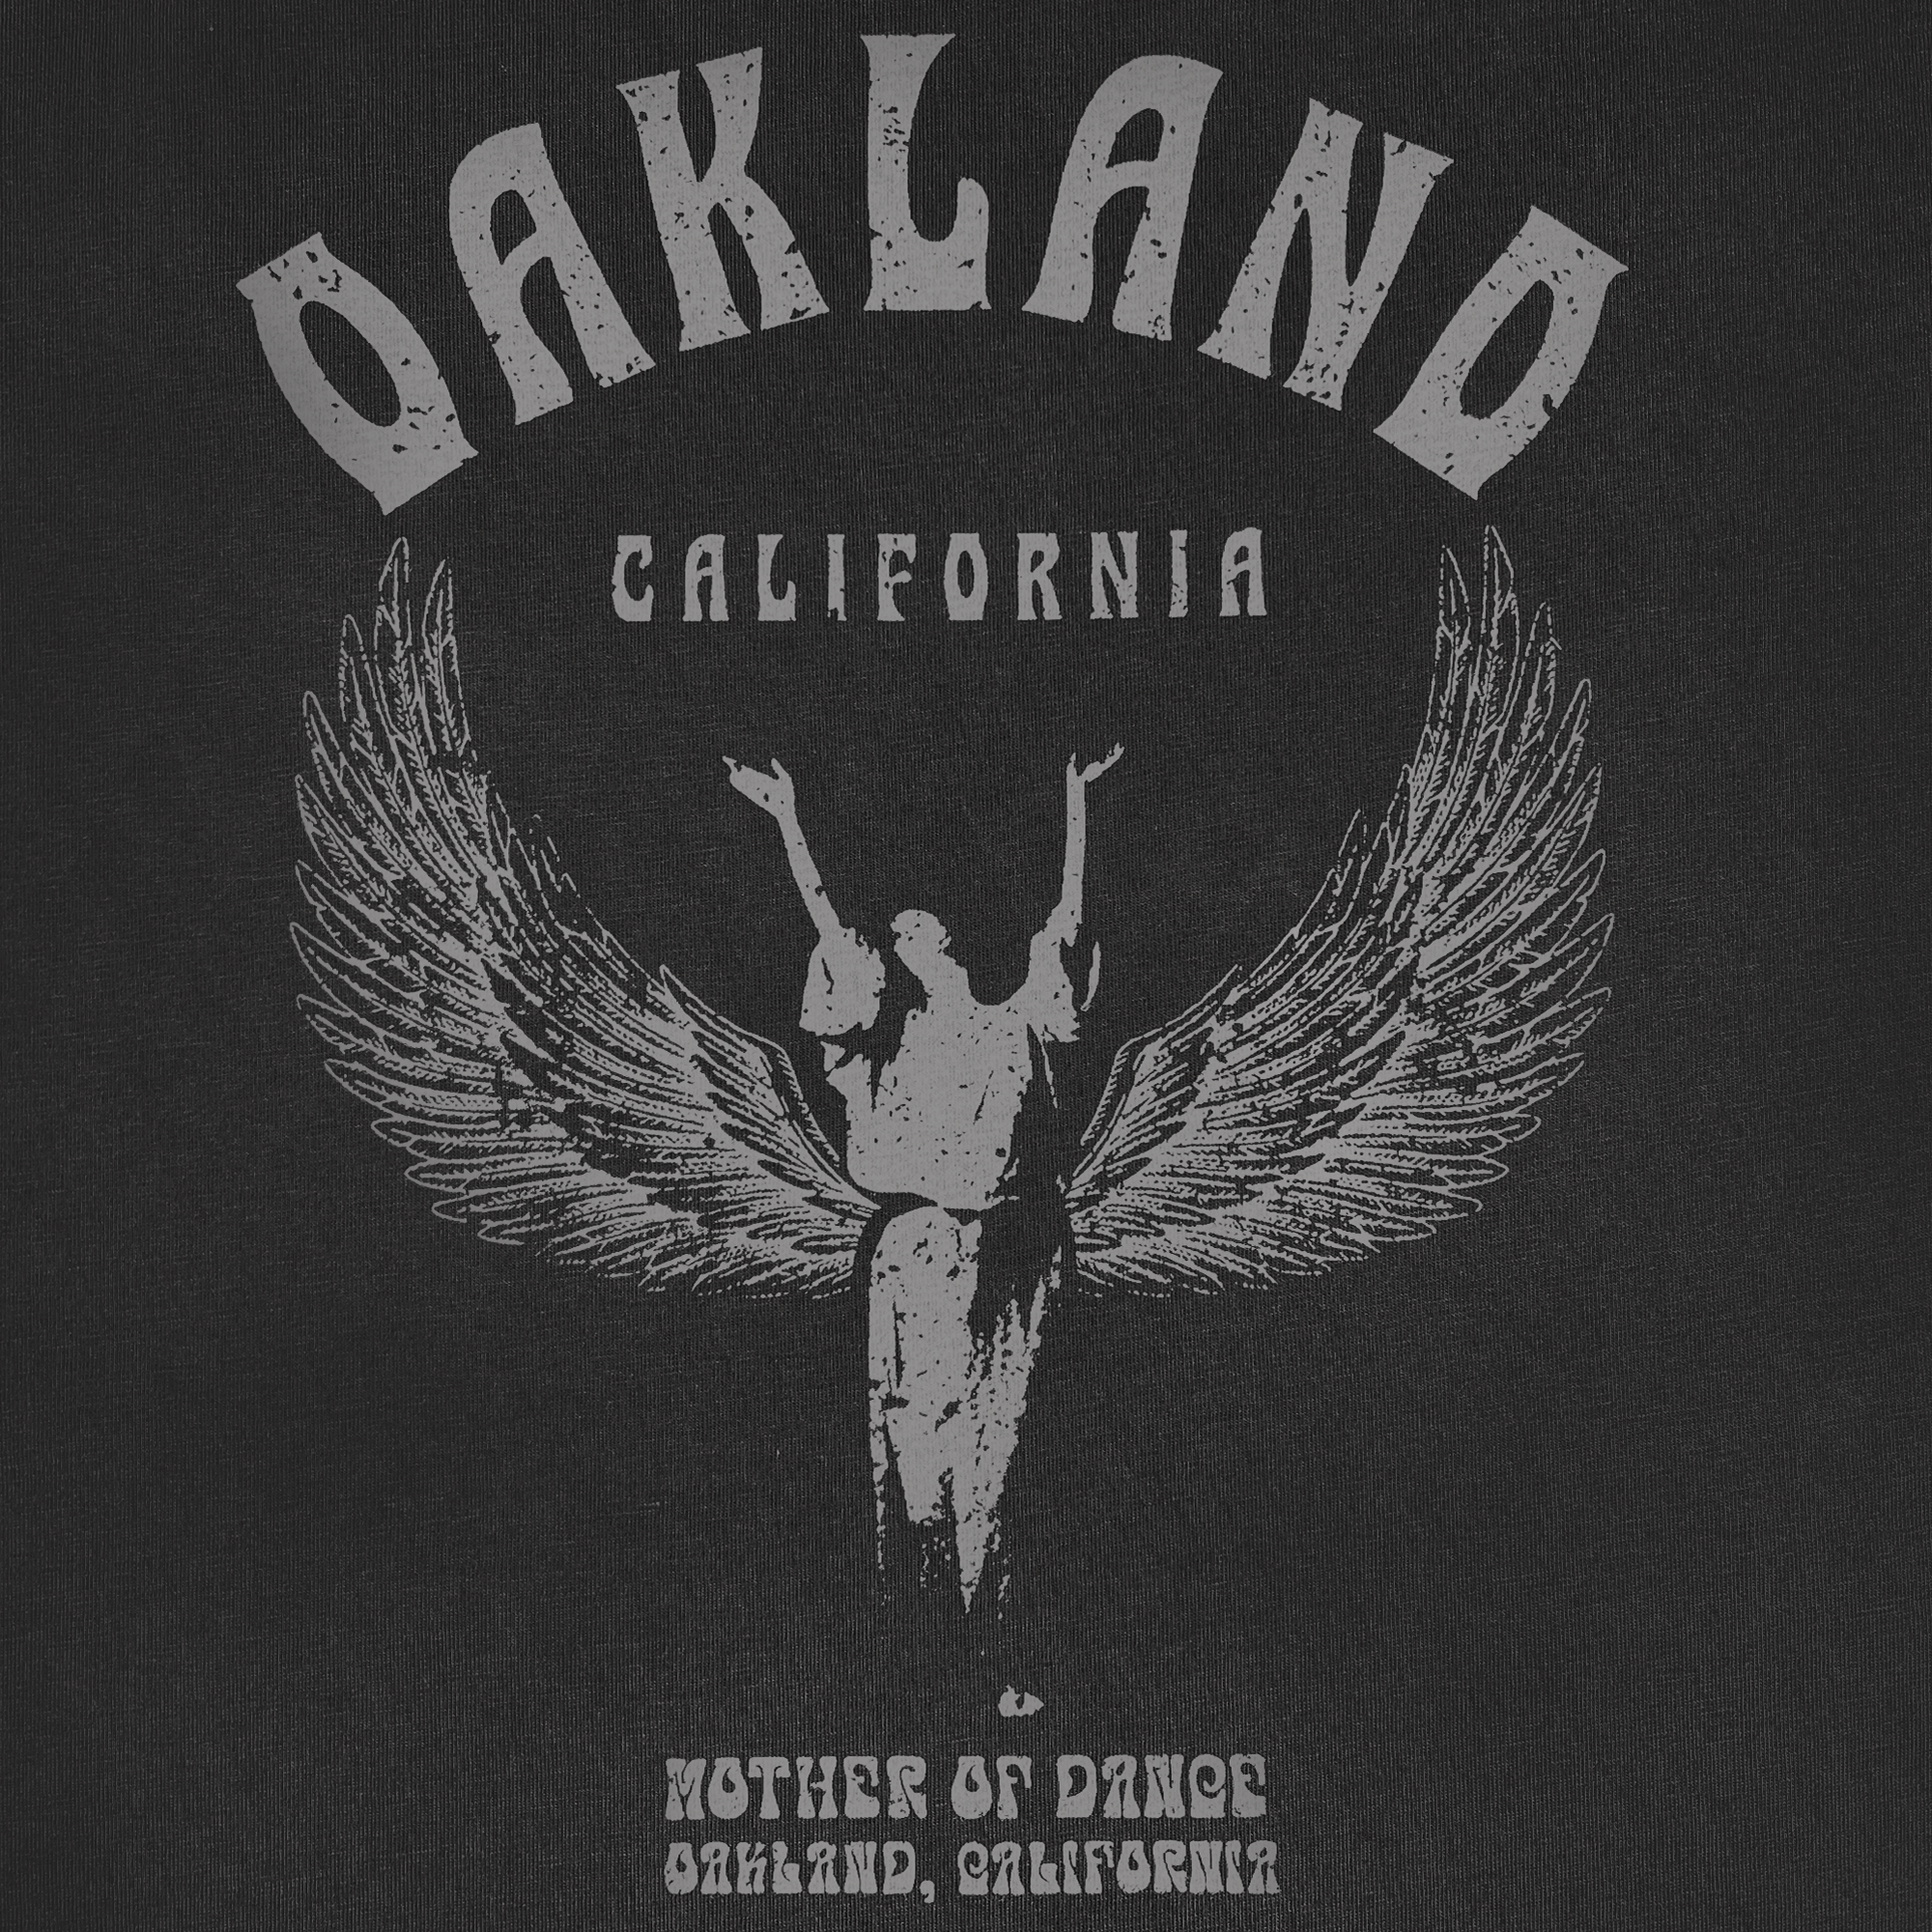 Detailed close up of Oakland California graphic celebrating Isadora Duncan, pioneer of modern dance on a faded black t-shirt.